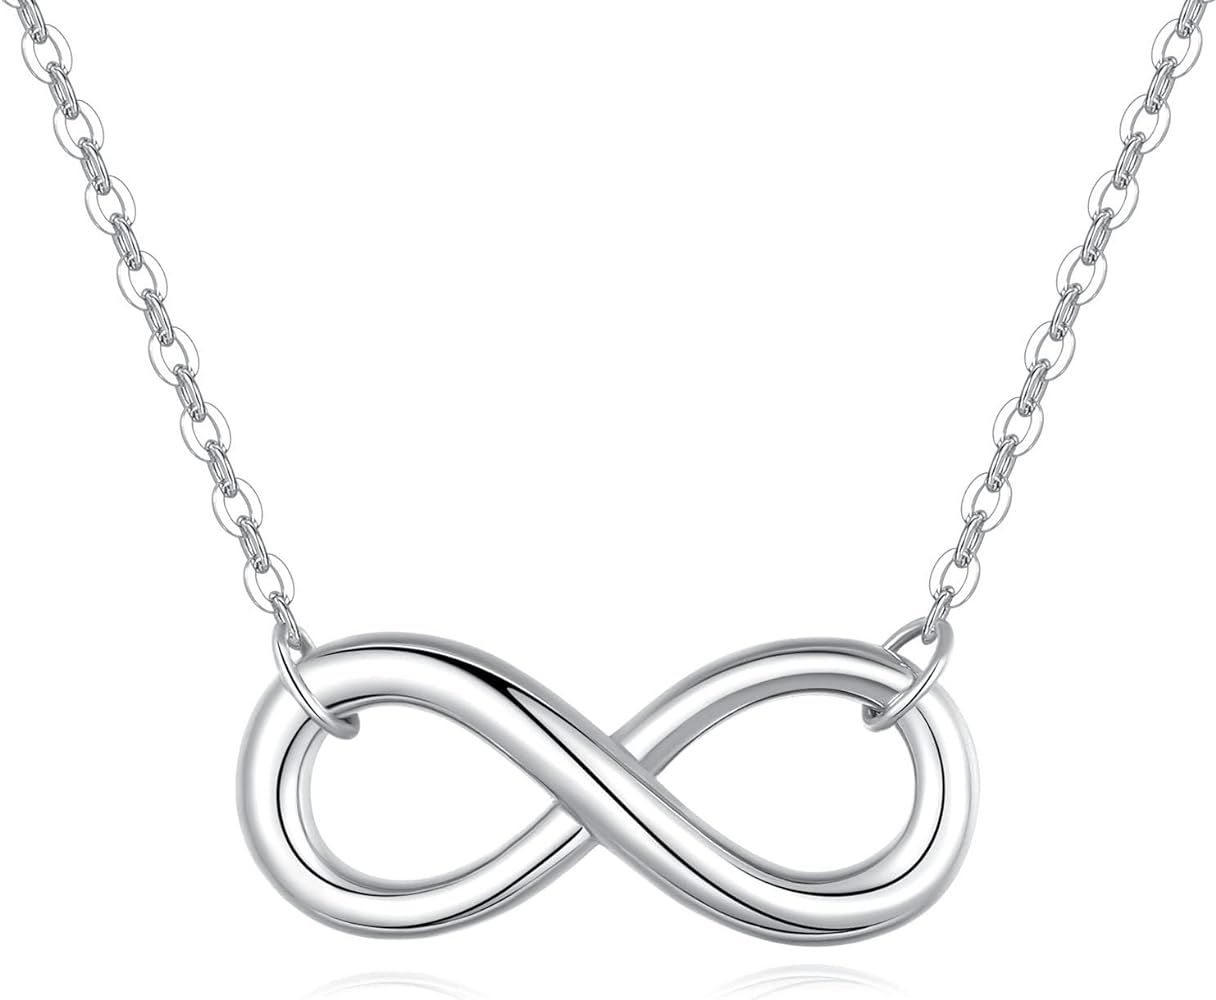 LAVISHE Rhodium Plated 925 Sterling Silver Infinity Necklaces for Women, 18 Inch | Amazon (US)